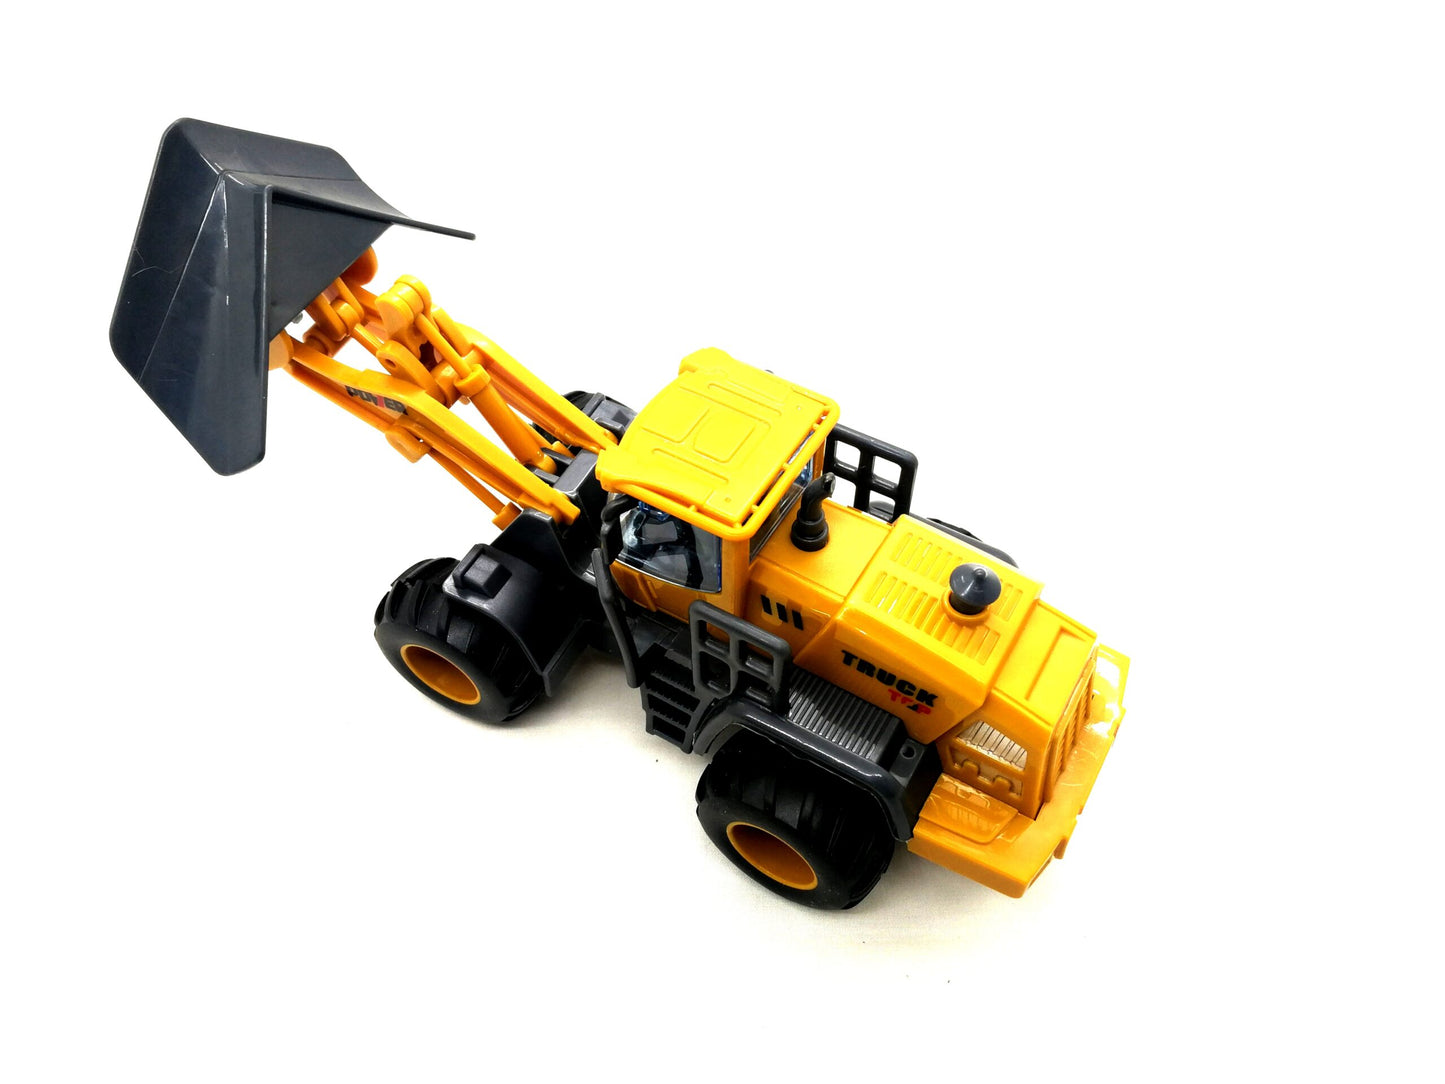 JCB Bulldozer Earth Mover Toy for Kids (V-Plow Attachment) (YELLOW AND BLACK)